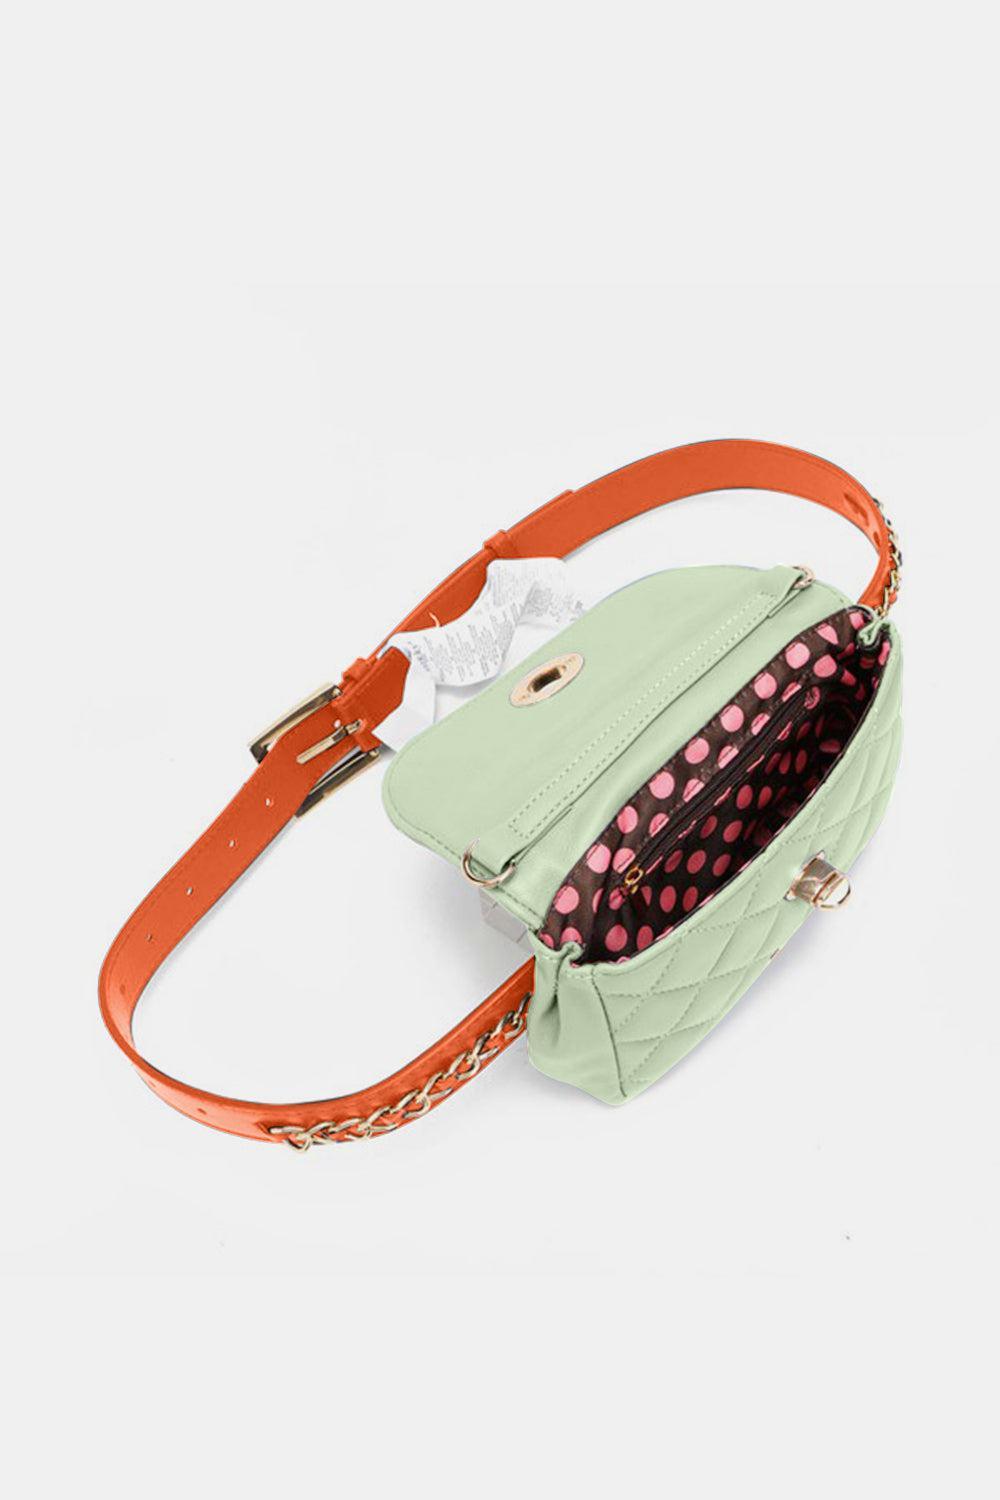 a small green purse with a red handle